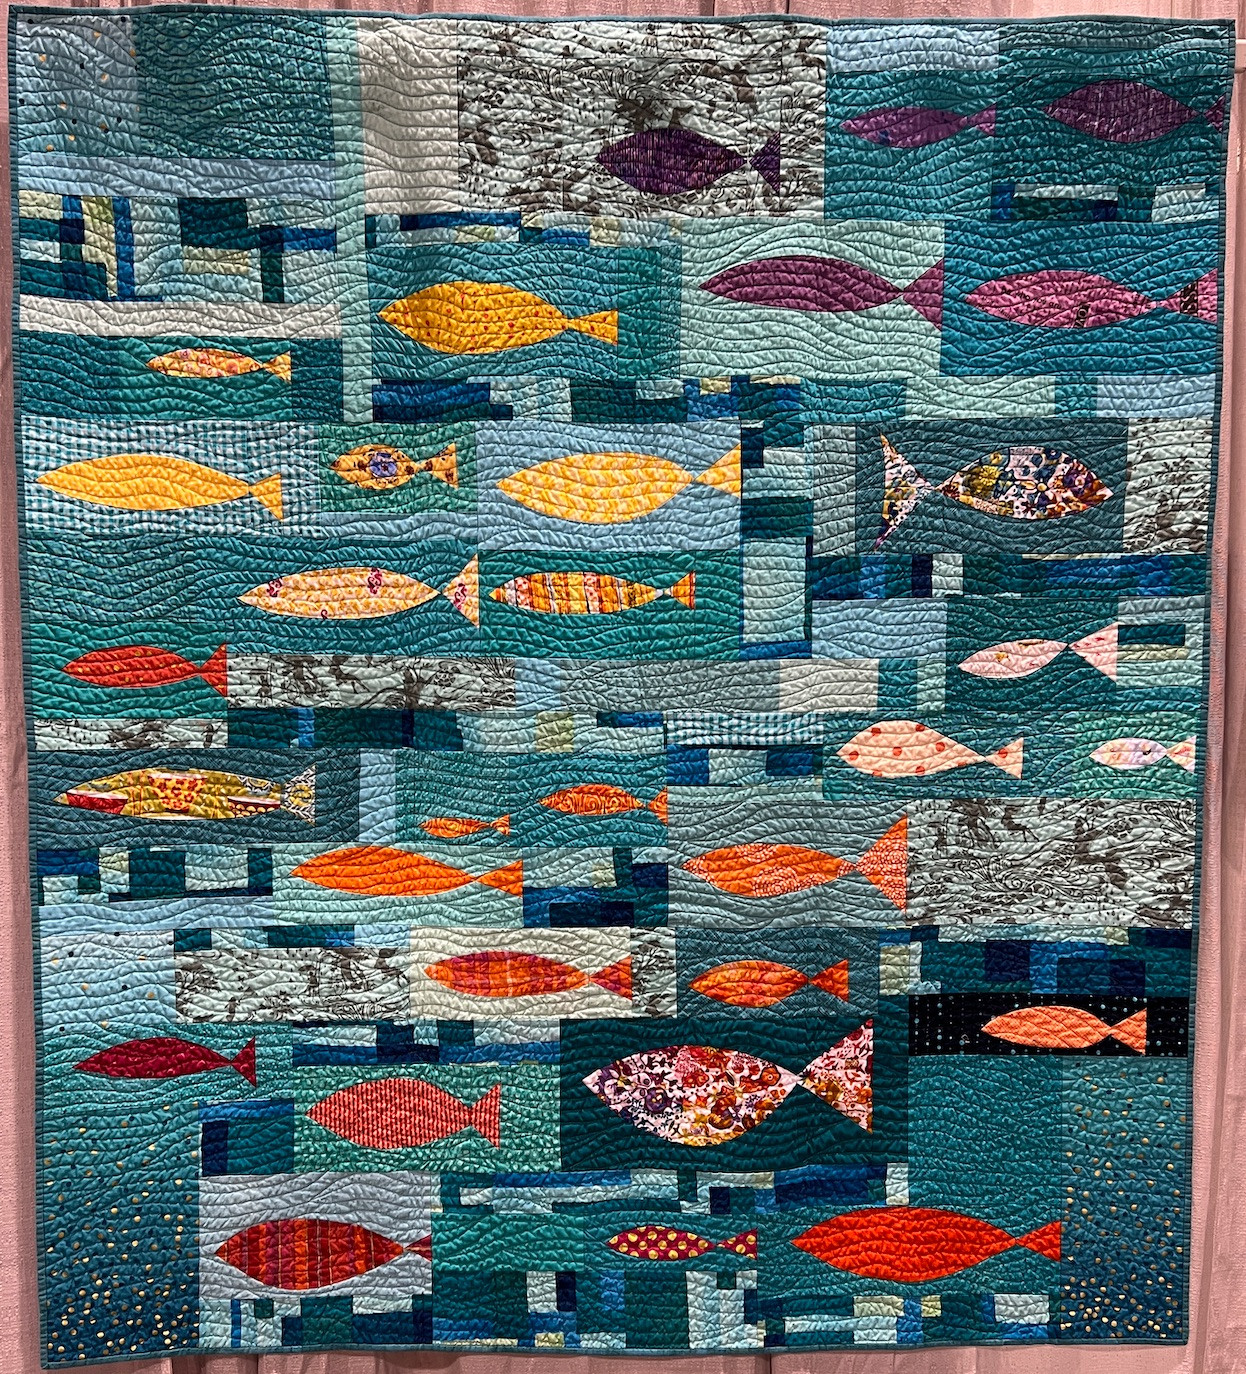 Shoals Quilt by Andrea Hardy and Fern Royce